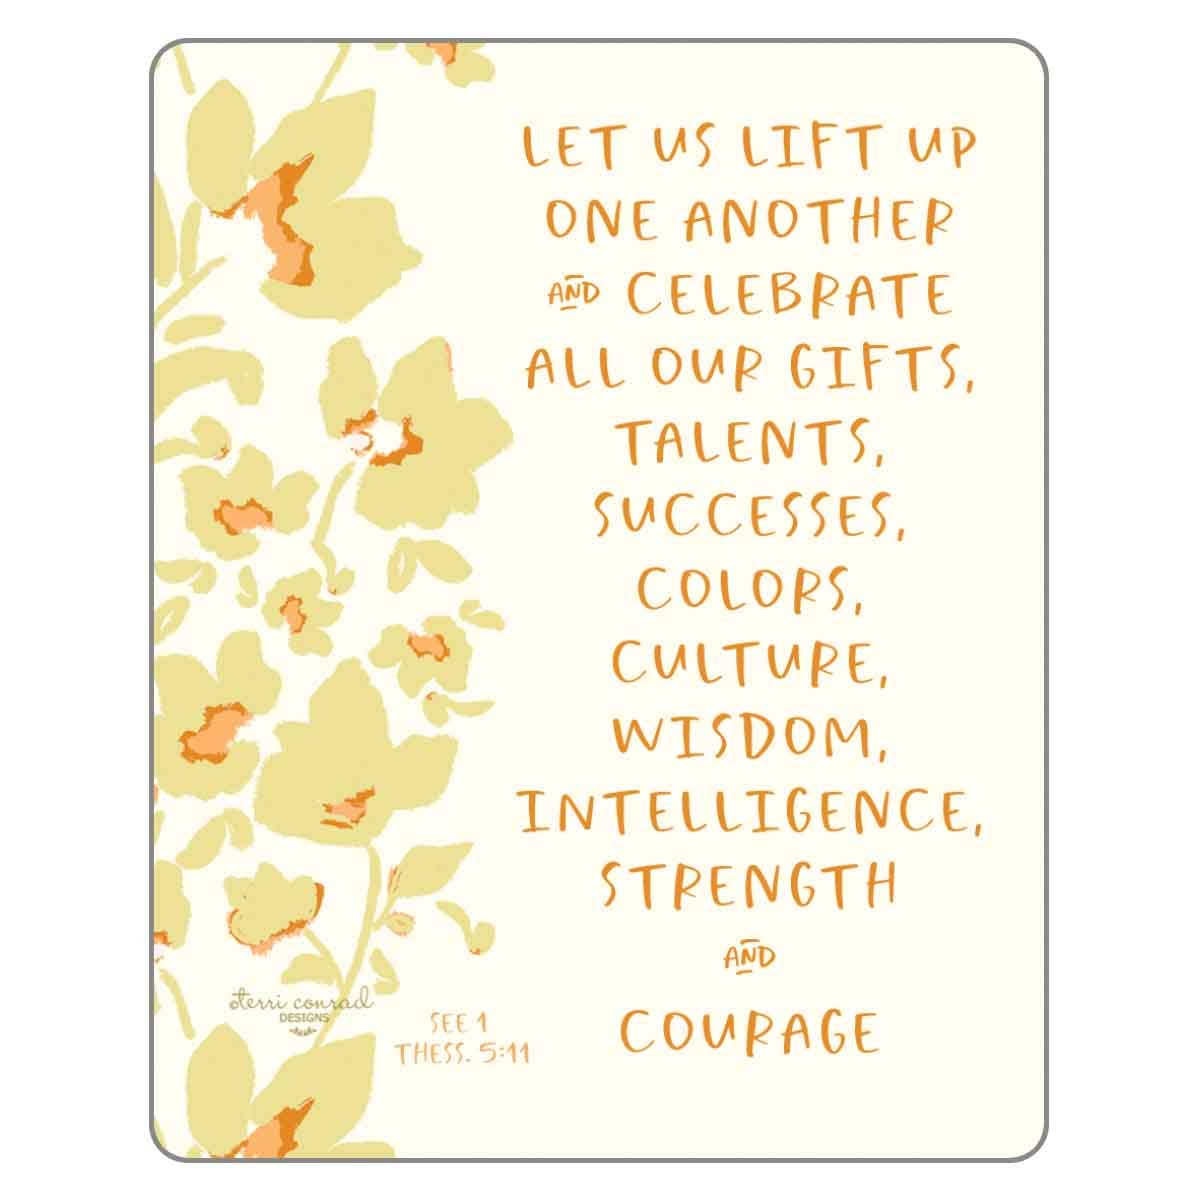 Lift Up One Another Prayer Magnet